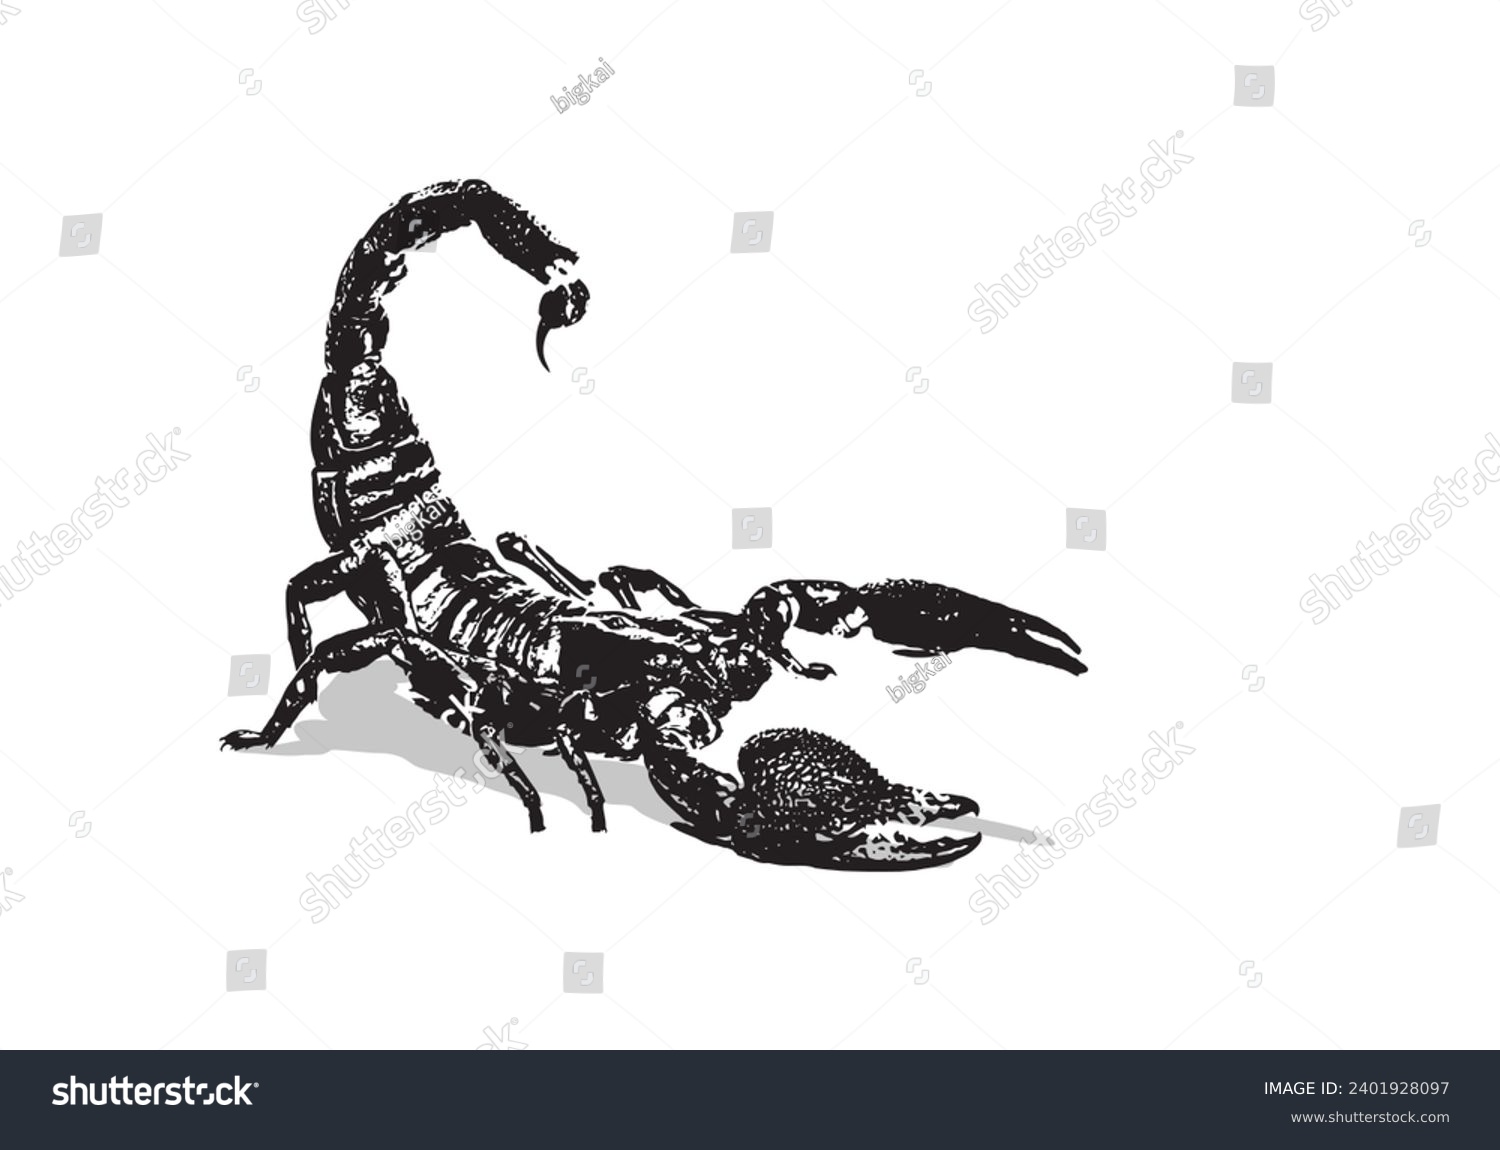 SVG of 
black and white scorpion vector image, suitable for icons, logos, t-shirts,
 svg